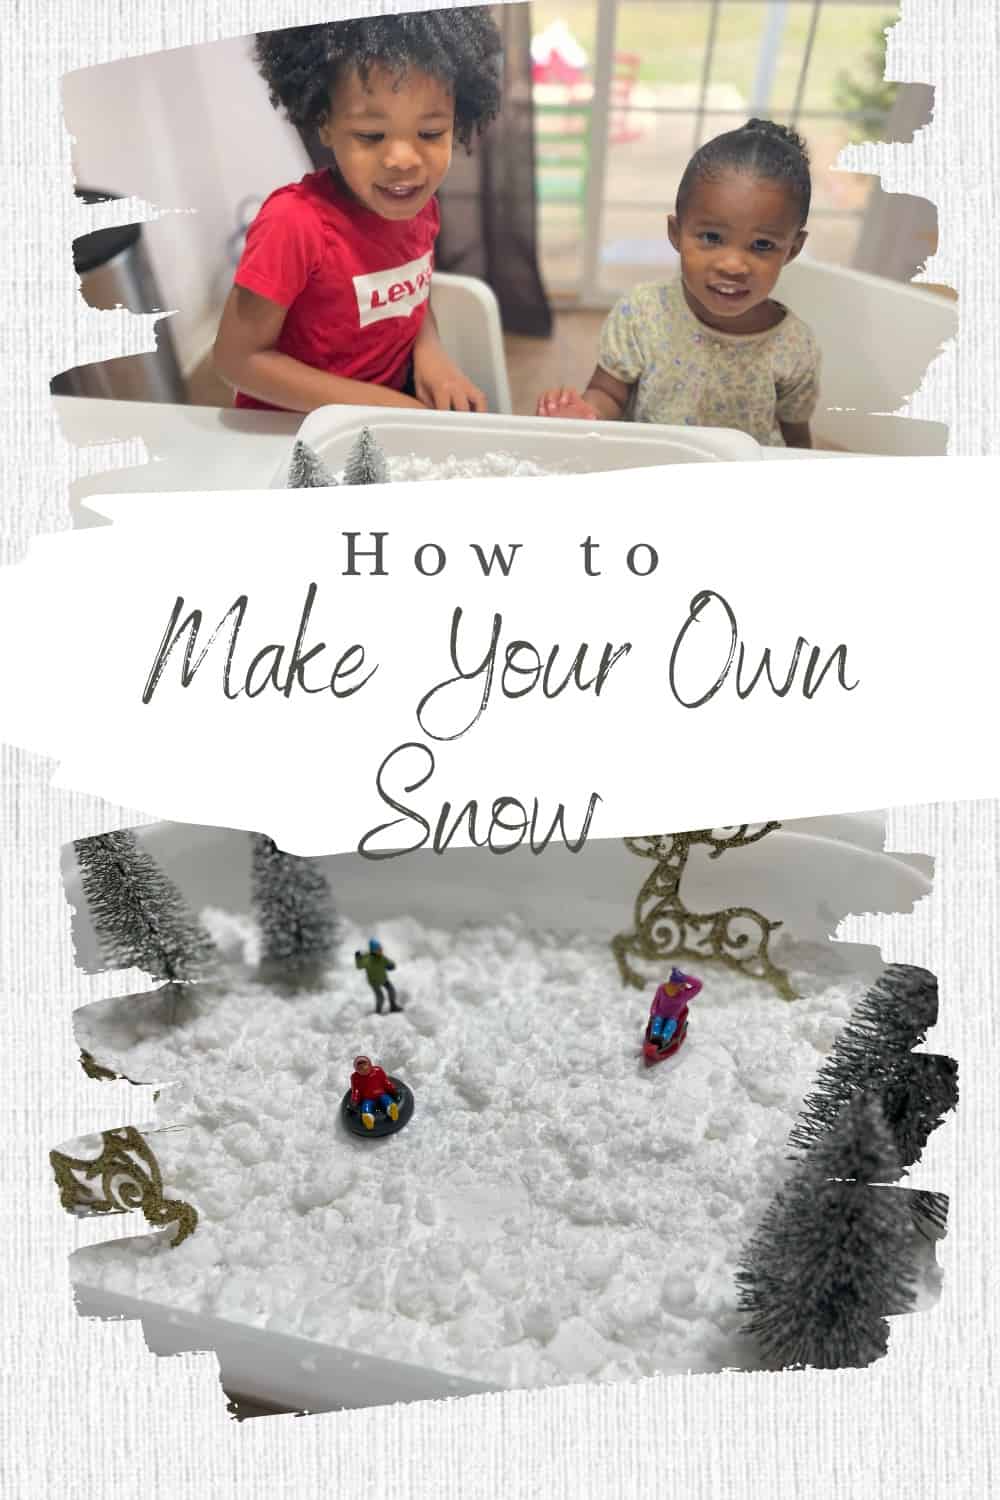 How to Make Your Own Snow - 3 Simple DIY Snow Recipes for Kids